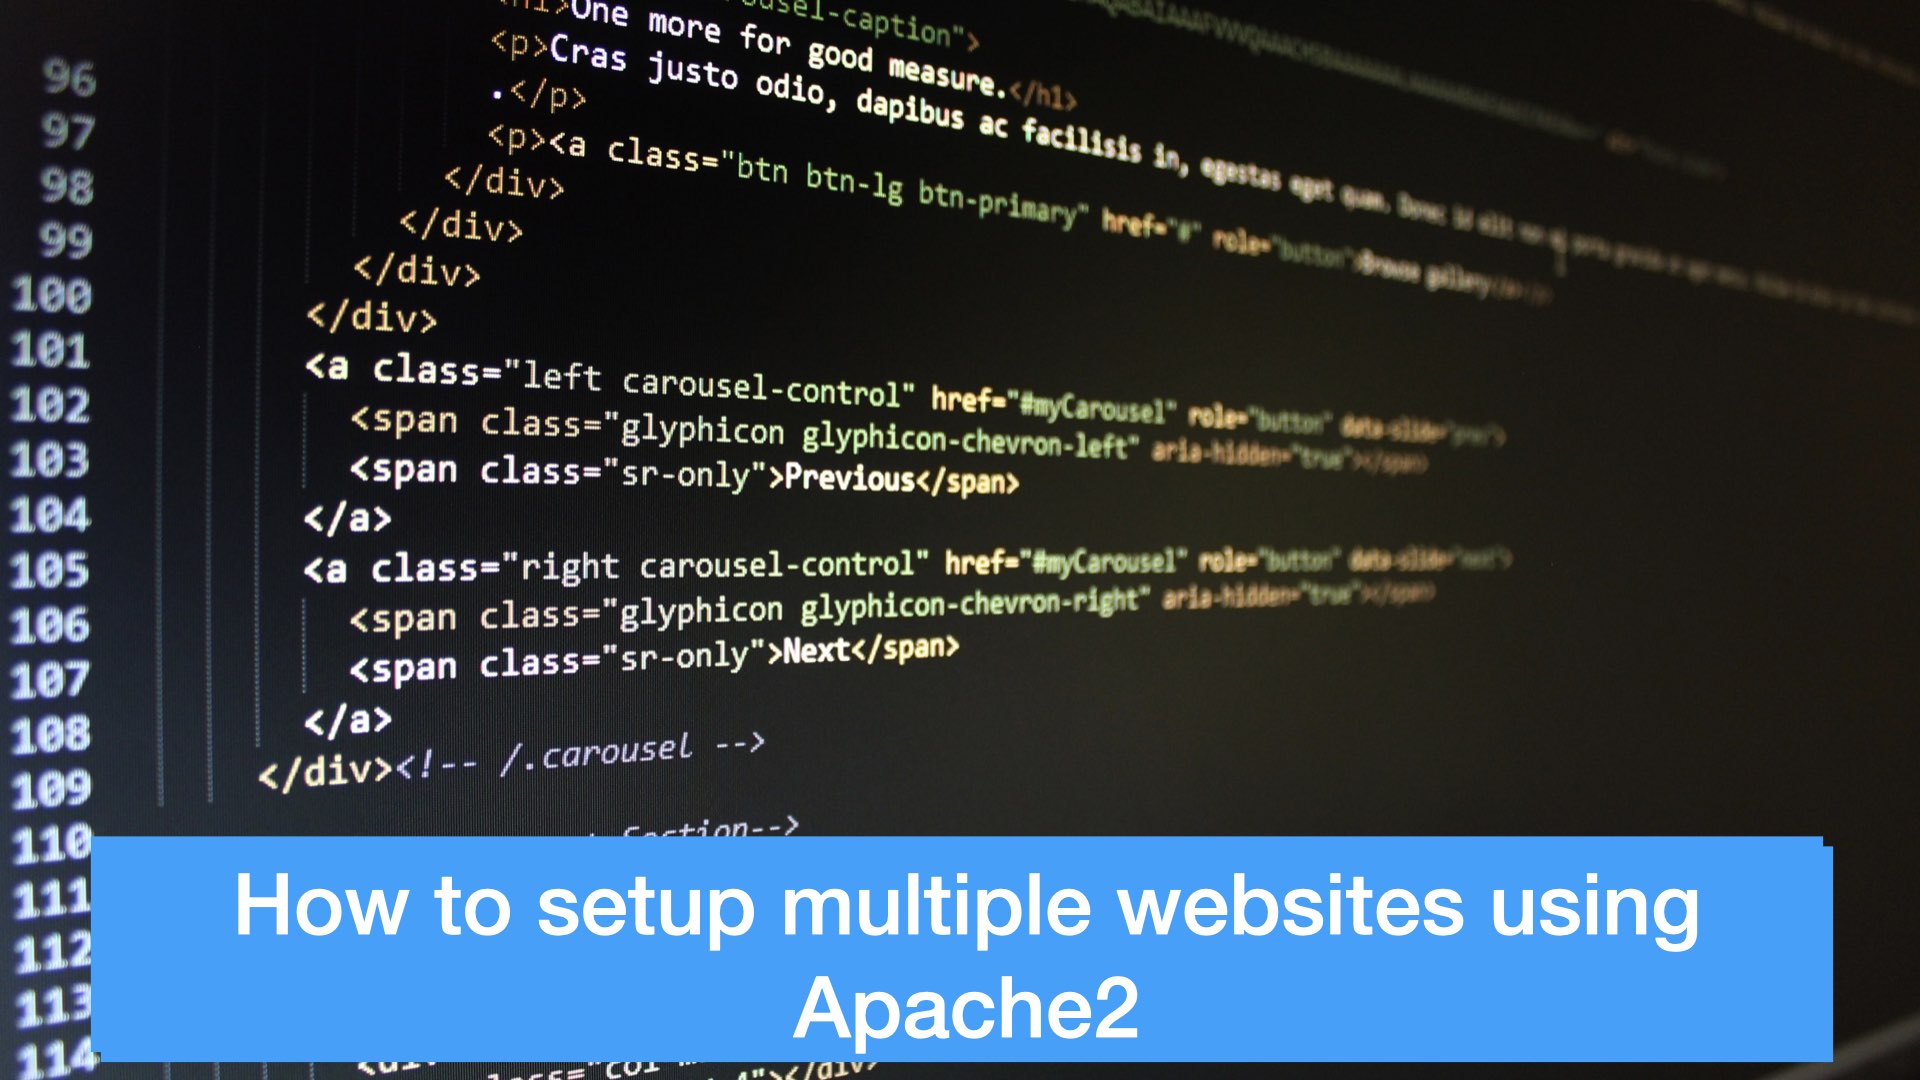 HOW TO SET UP MULTIPLE WEBSITES USING APACHE2